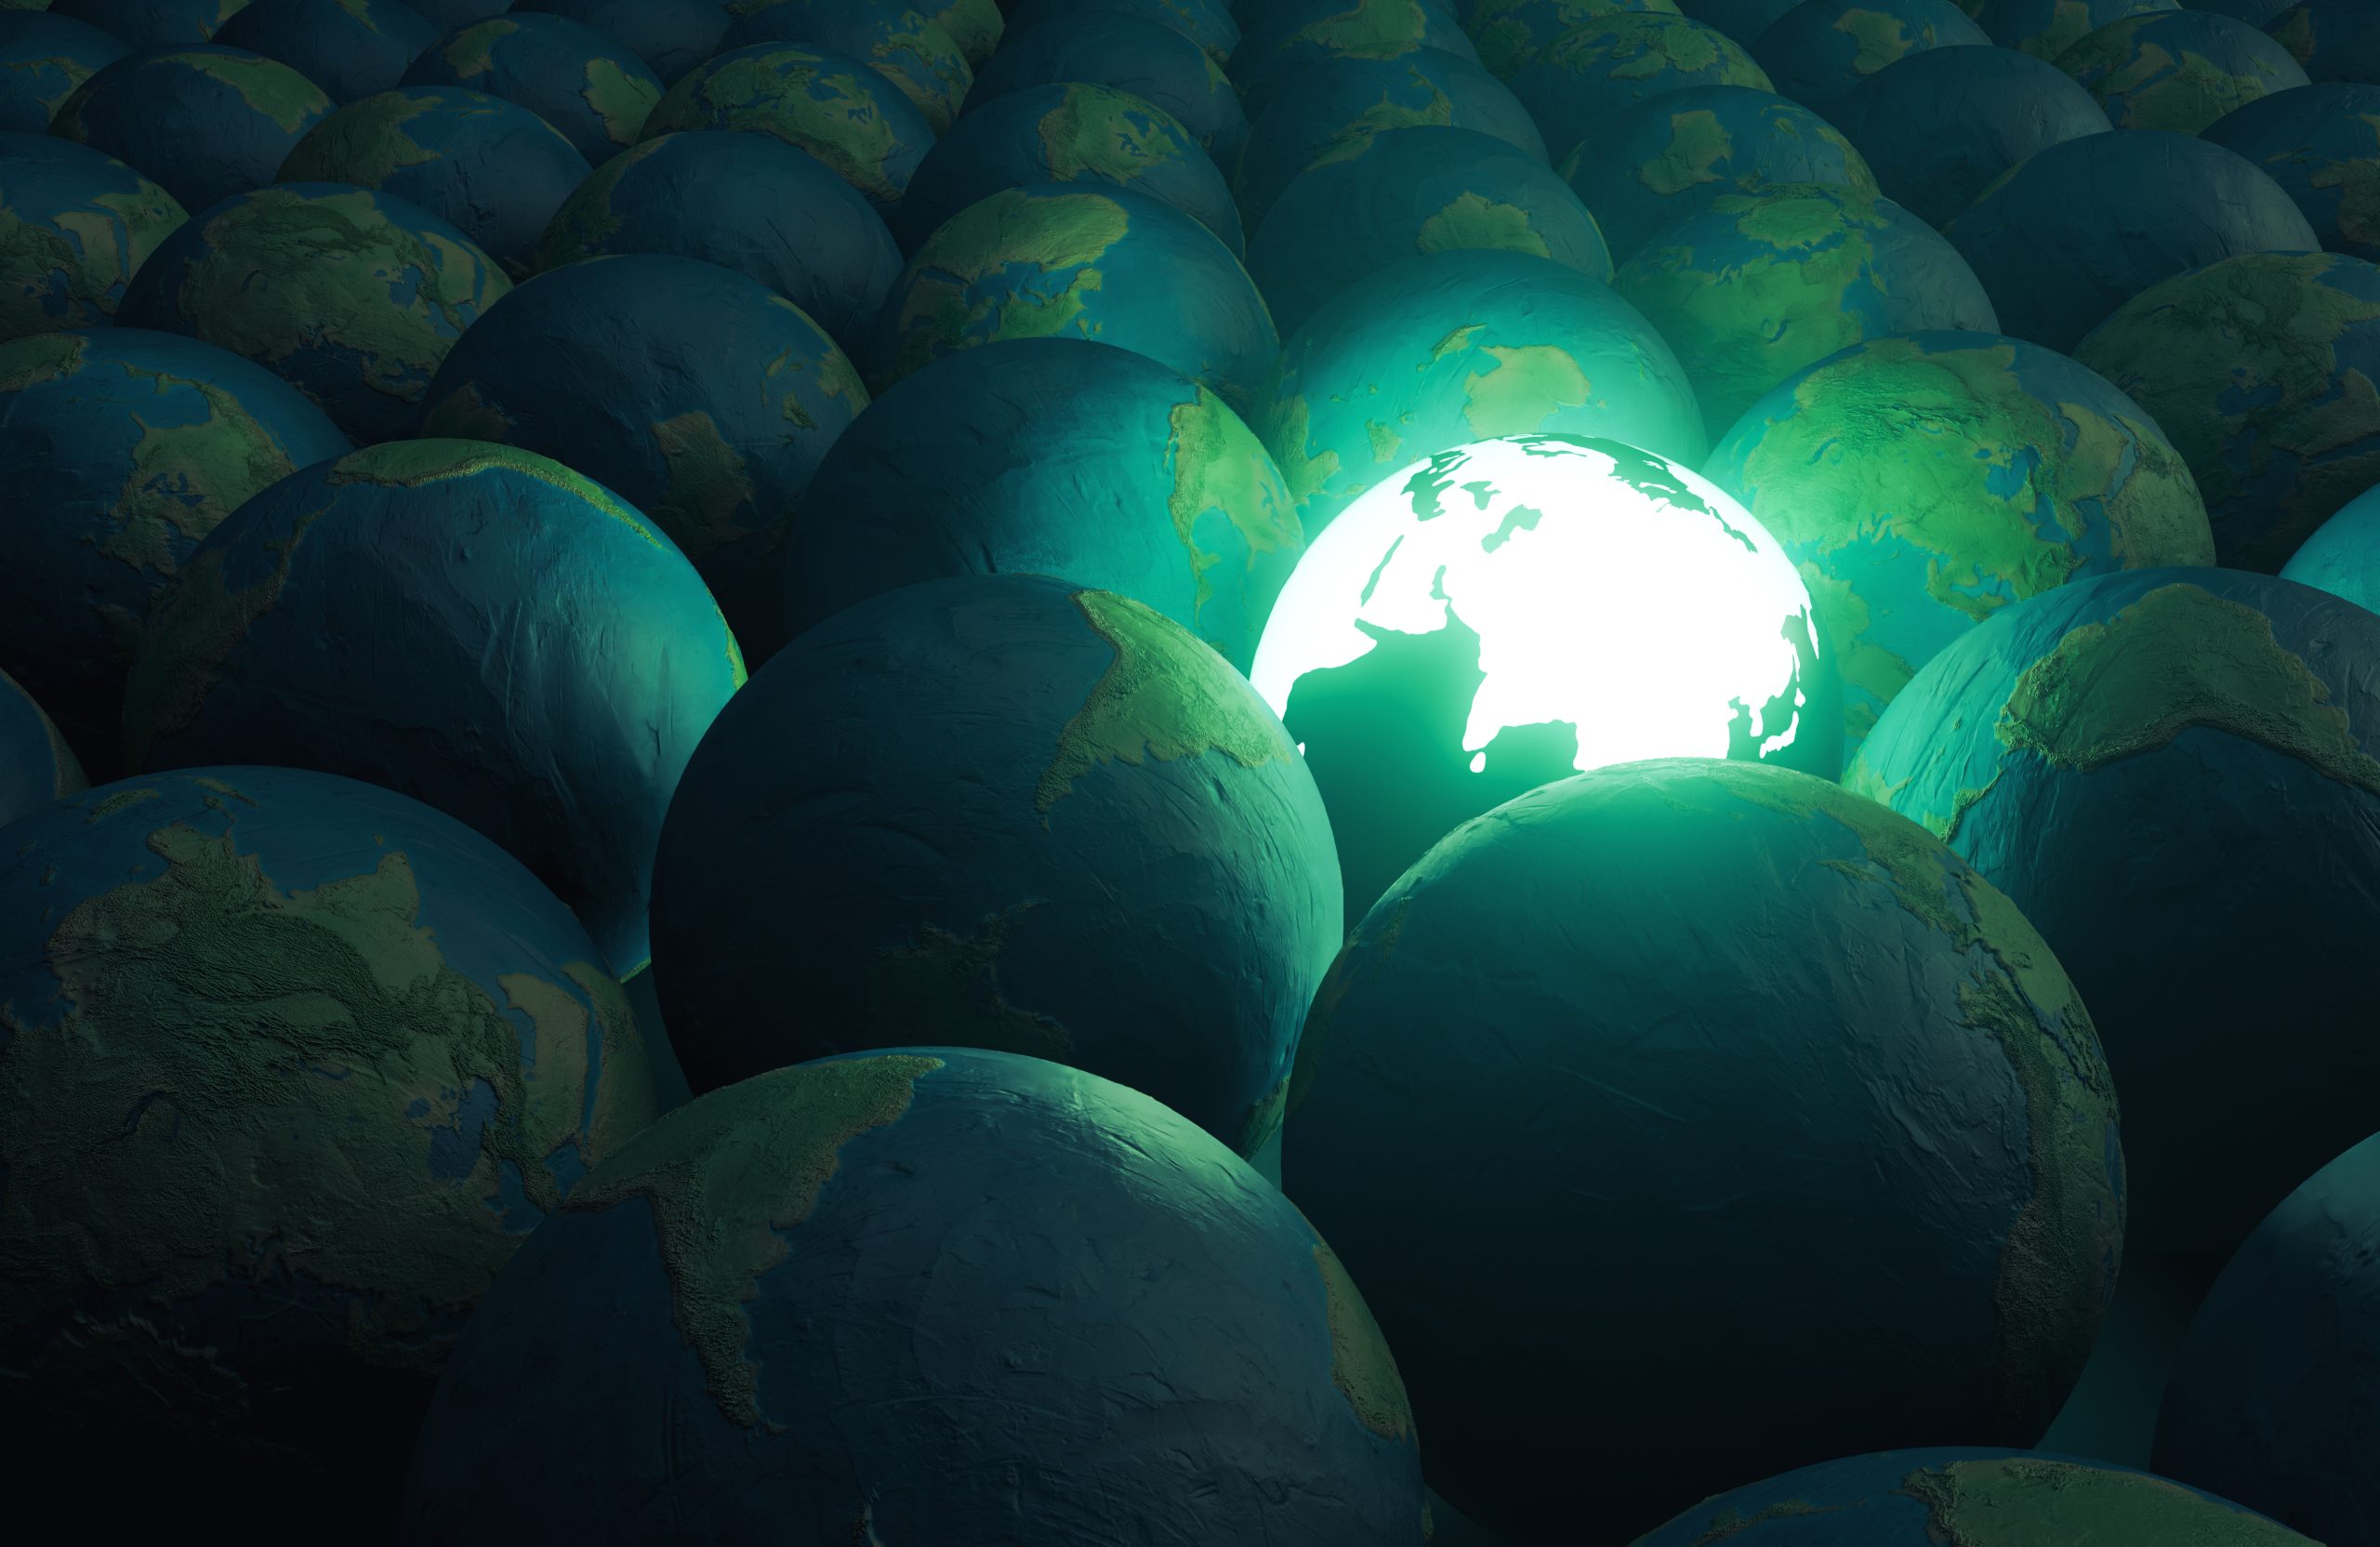 A 3D render of an illuminated neon florescent earth globe among a collection of dull earth globes made of rough clay